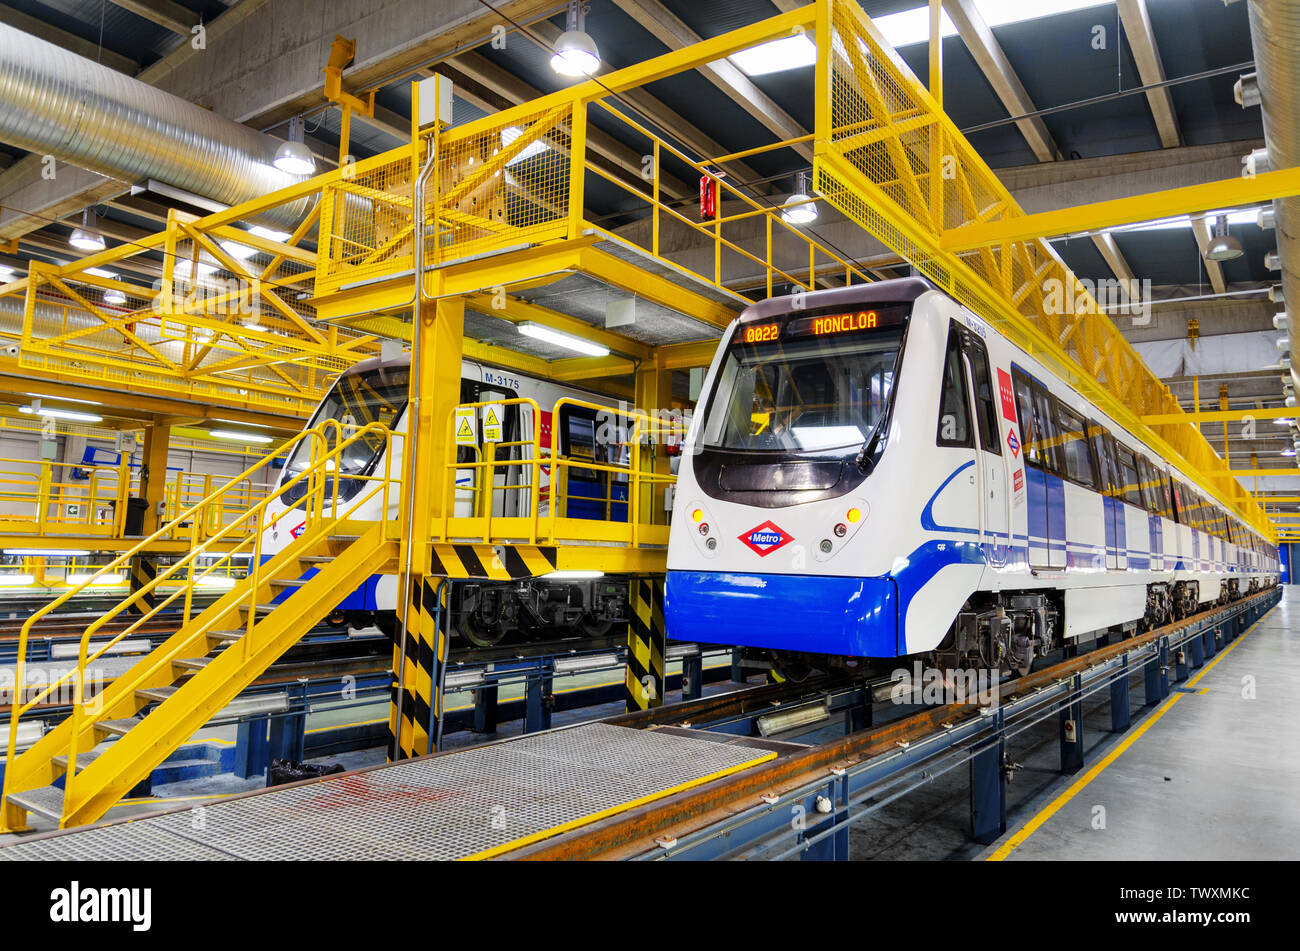 Madrid, Spain - December 25, 2012: The repair depot for trains Metro de Madrid underground railway system. Area of service and repair of wagons and trains .  Stock Photo